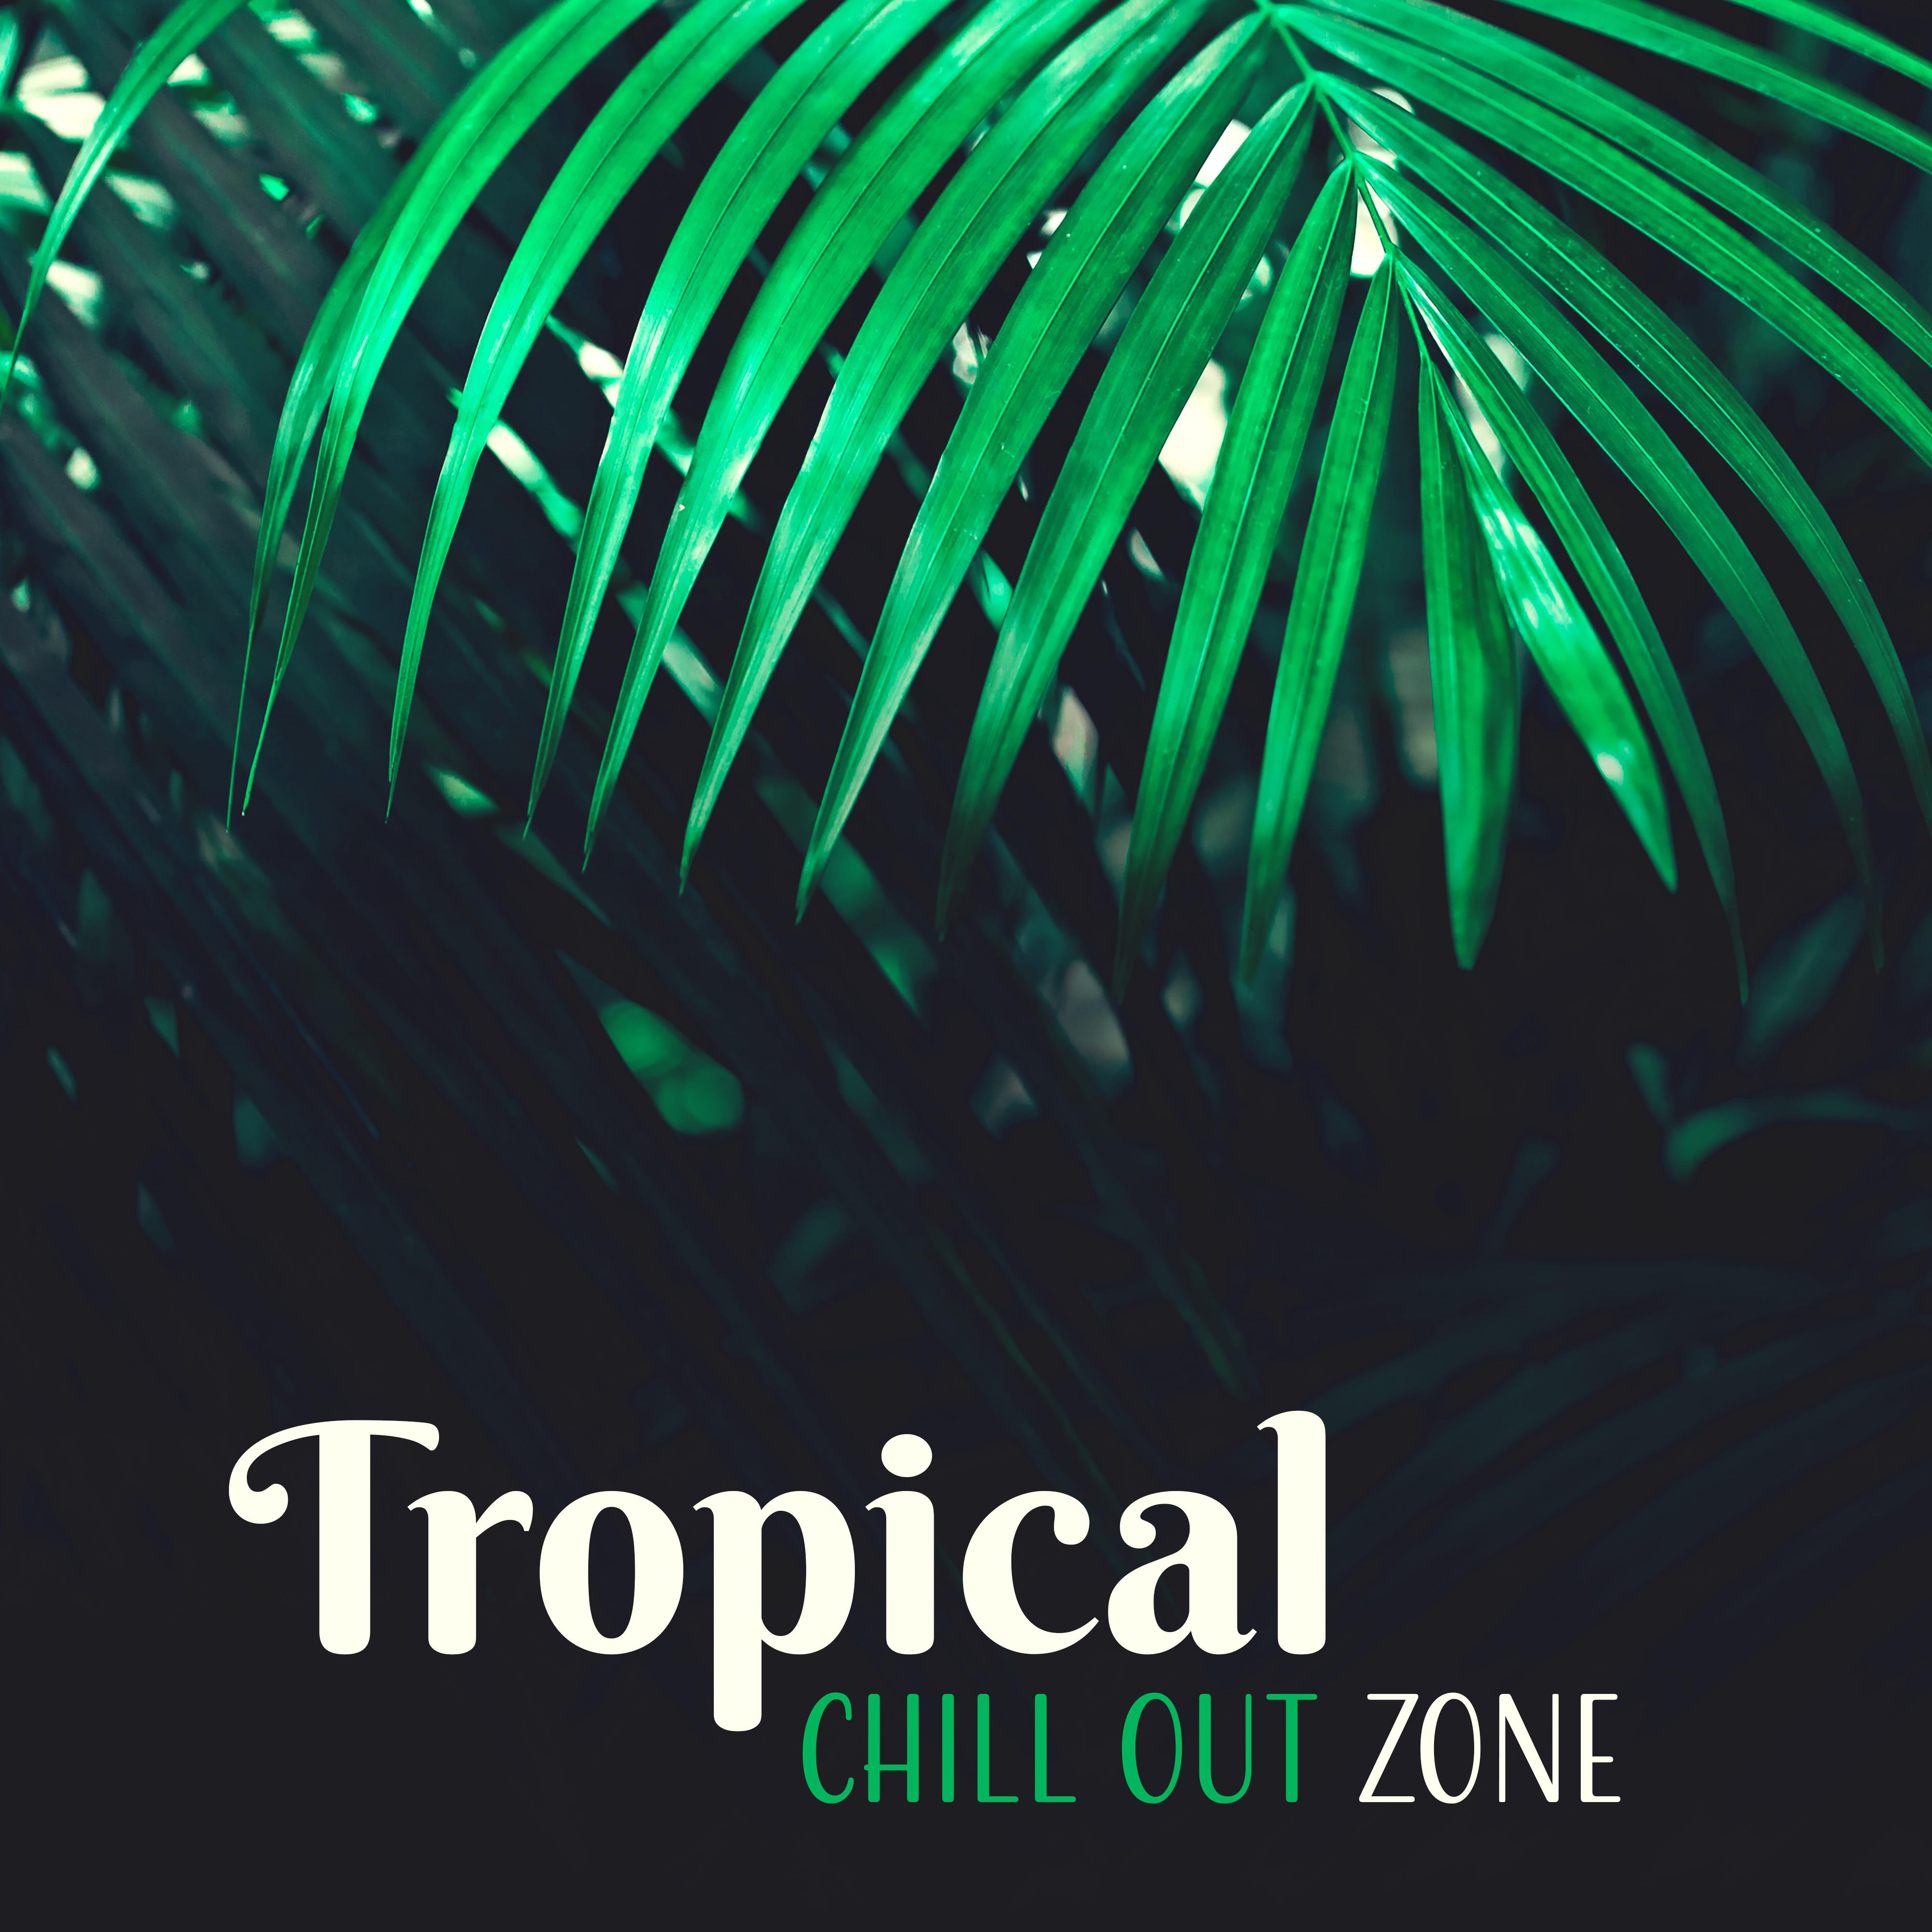 Tropical Chill Out Zone  Todays Chillout, Chill Out to Dance, Party Hits 2017, Relax, Exotic Beach